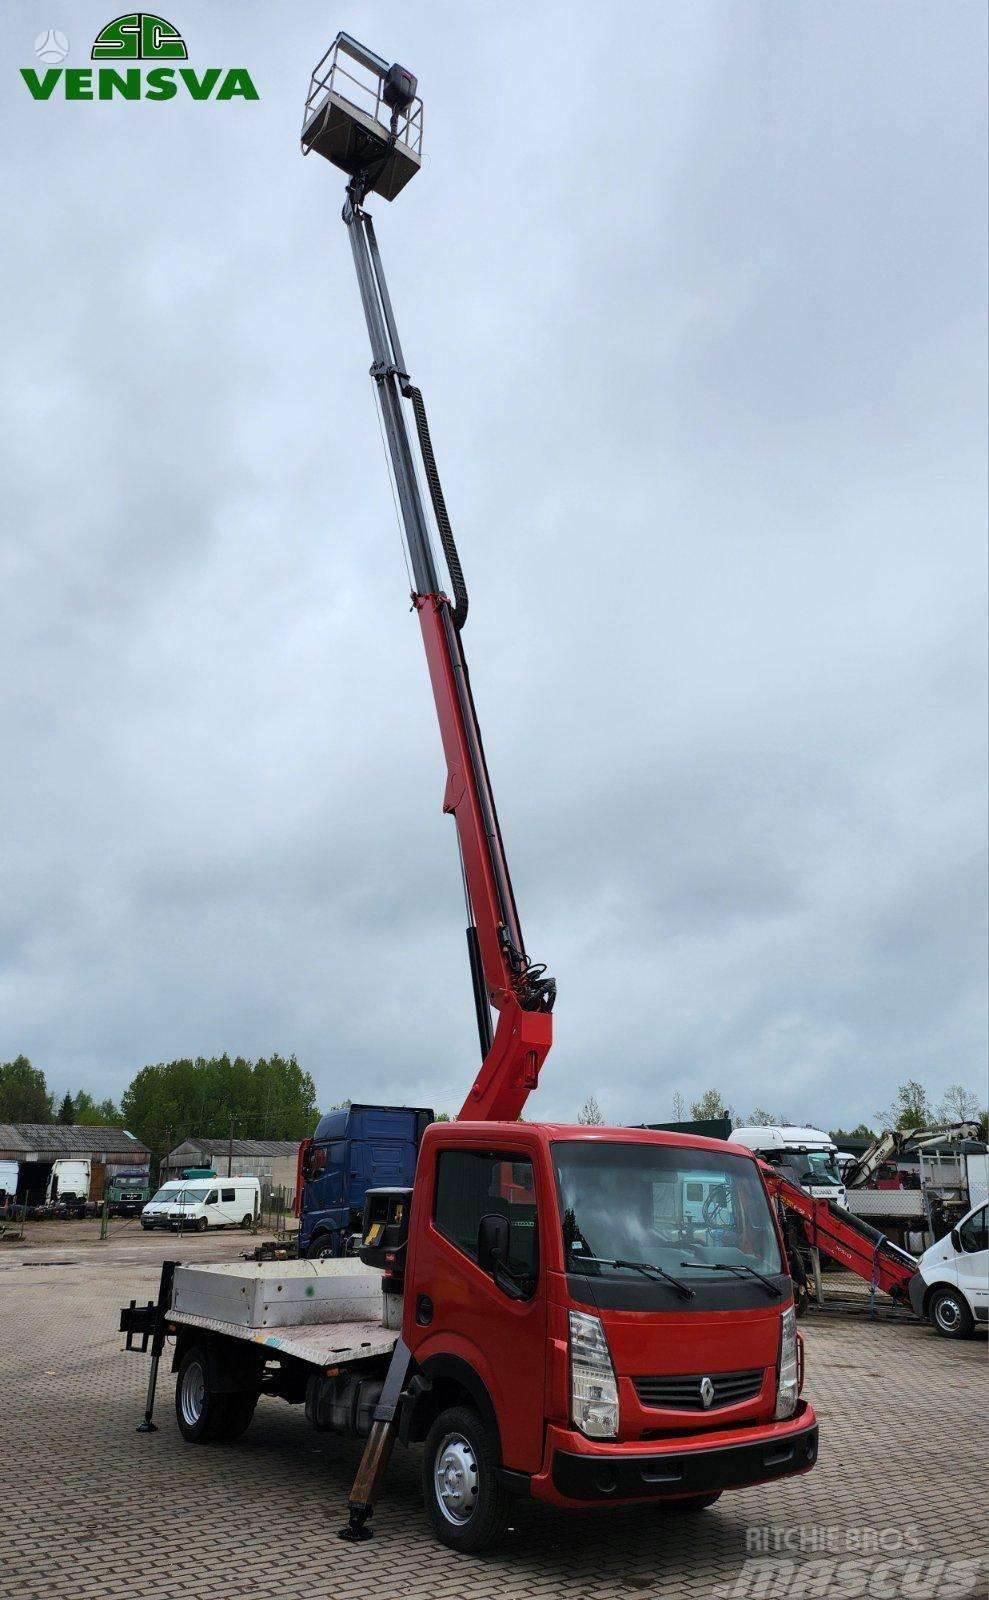 Renault Maxity 130.35 17m. Height boom Autre